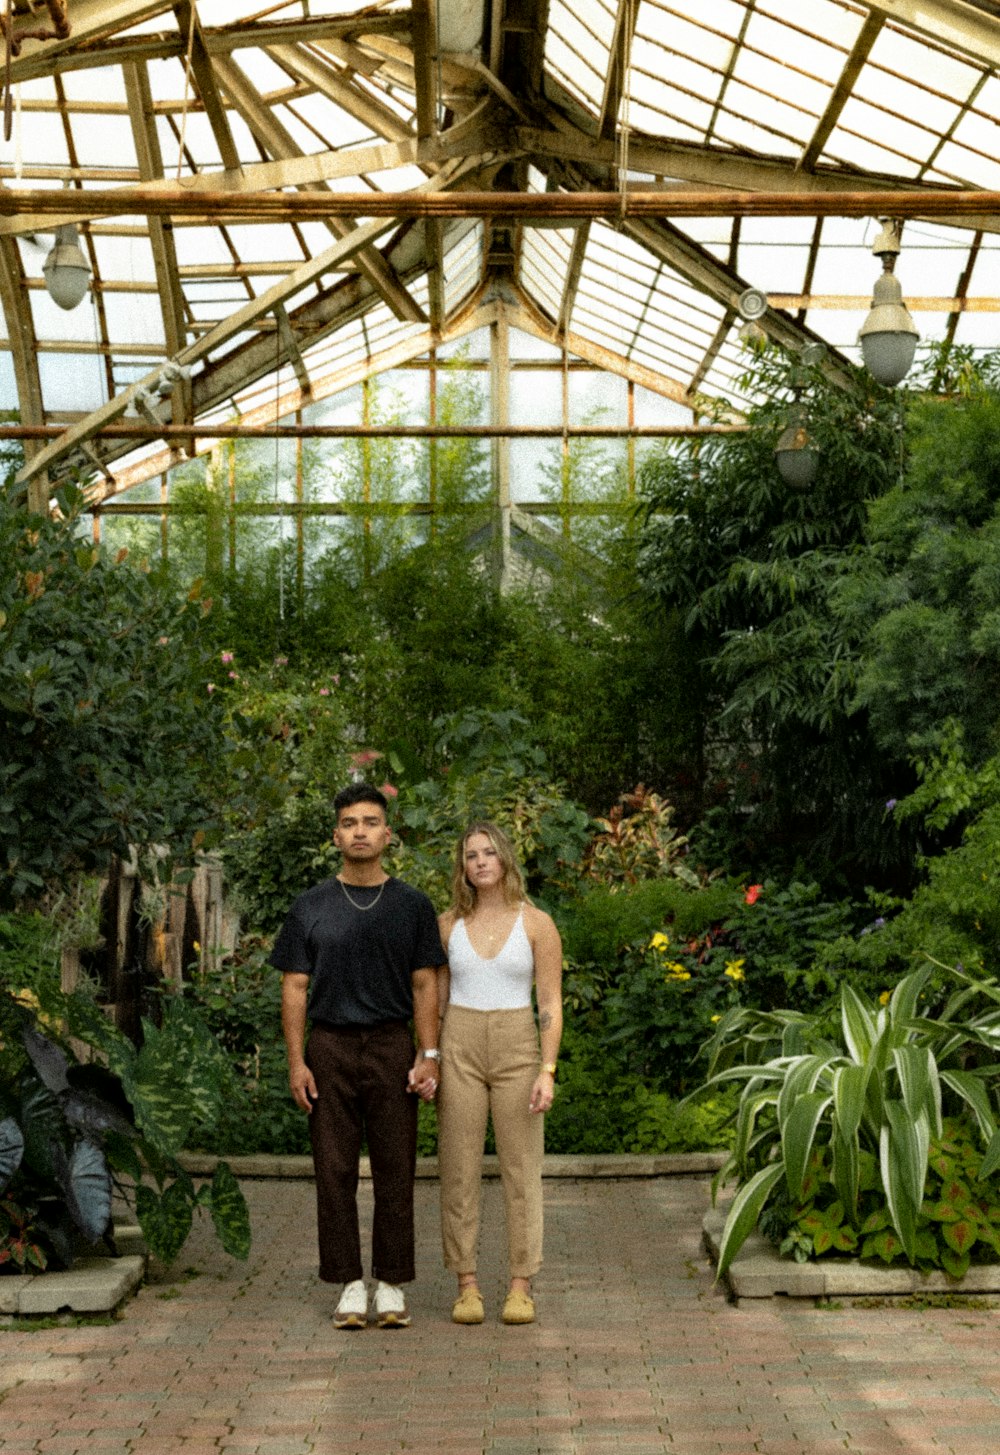 a man and woman standing under a covered area with plants and a structure